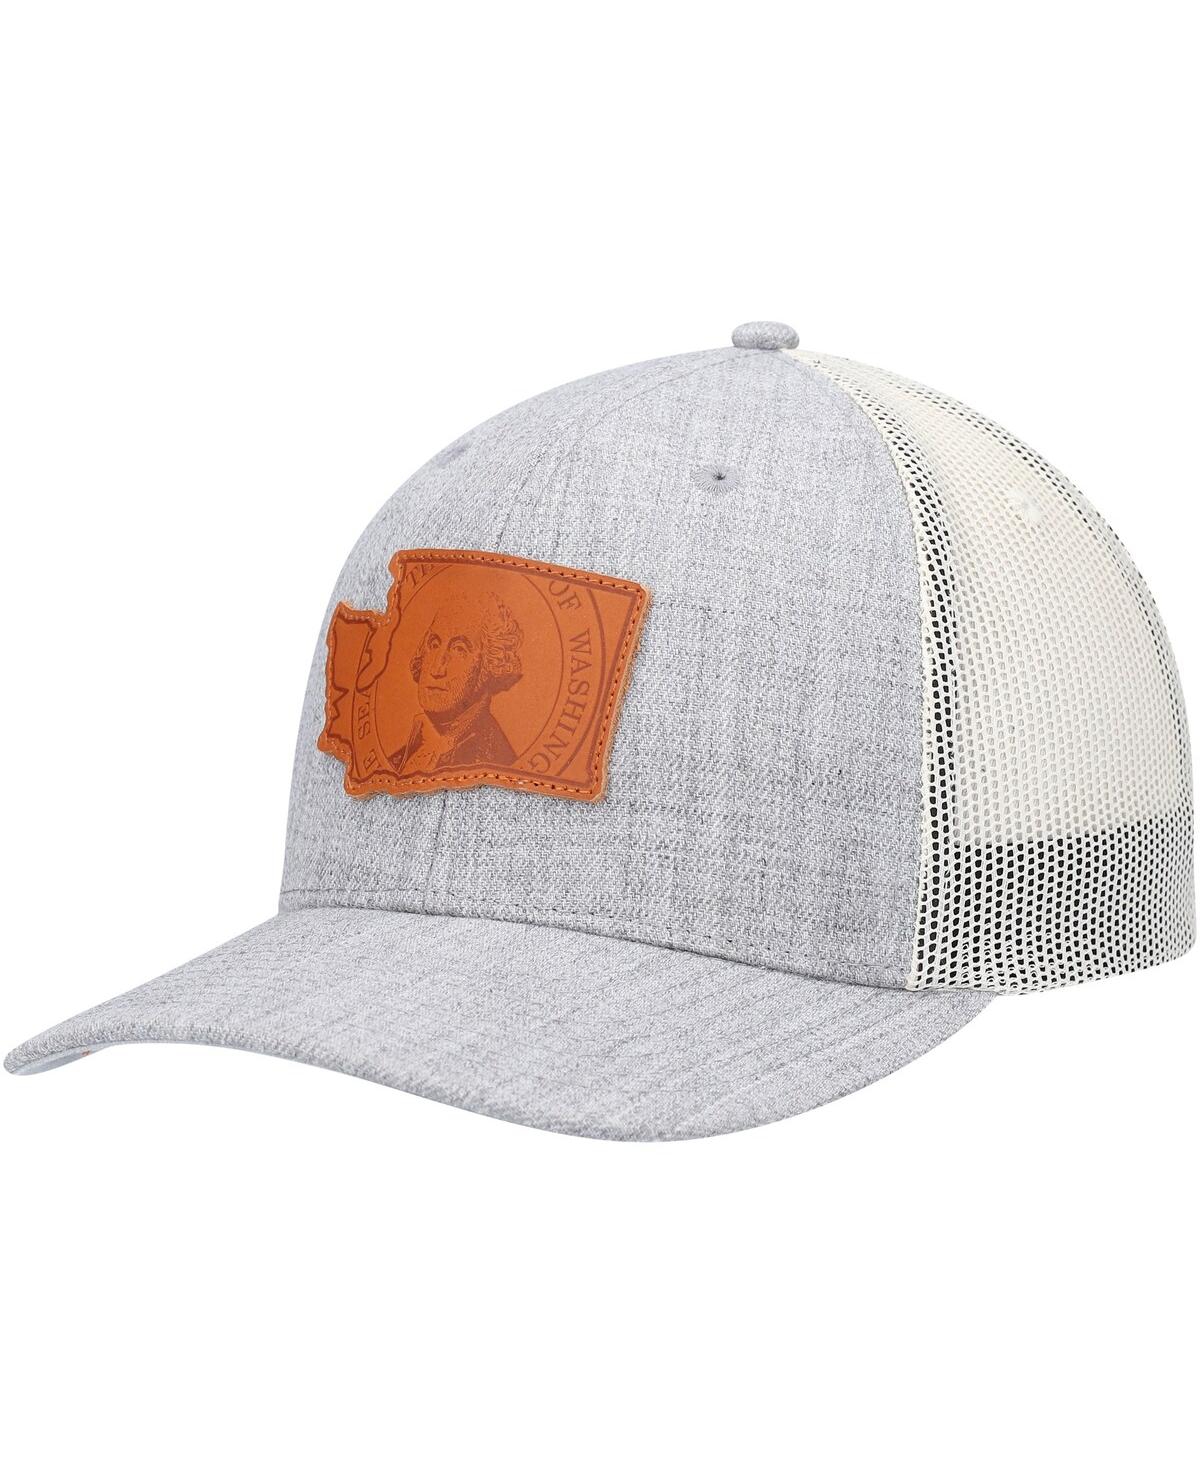 Local Crowns Men's  Heather Gray Washington Leather State Patch Trucker Snapback Hat In Heathered Gray